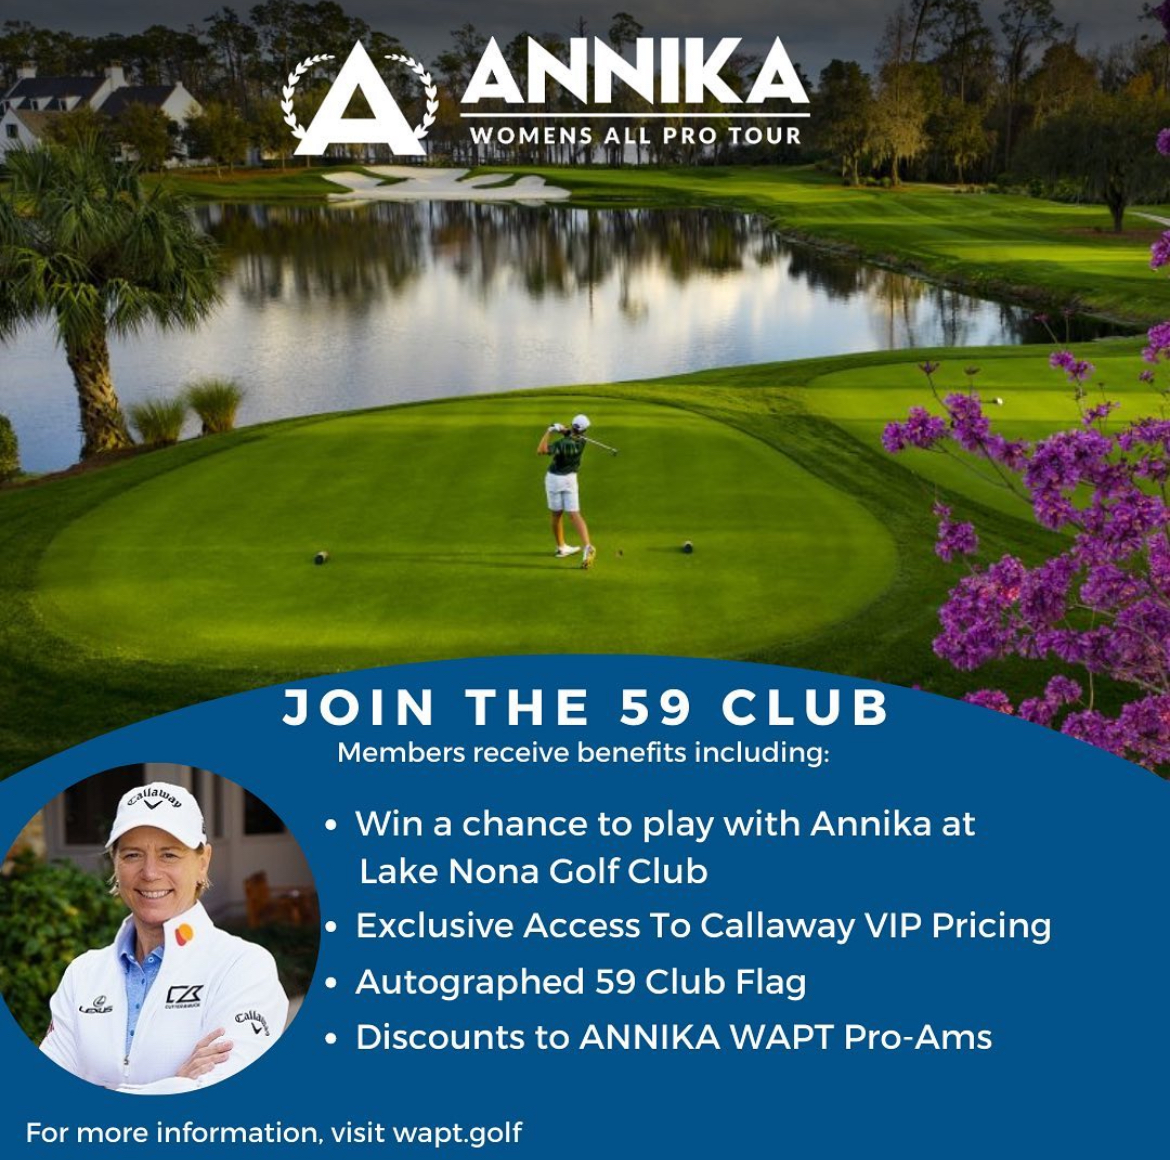 Theres still time to join the 59 Club which includes some amazing member perks including a chance to play a round with Annika! Sign up now: …ika-wapt-59-club.perfectgolfevent.com